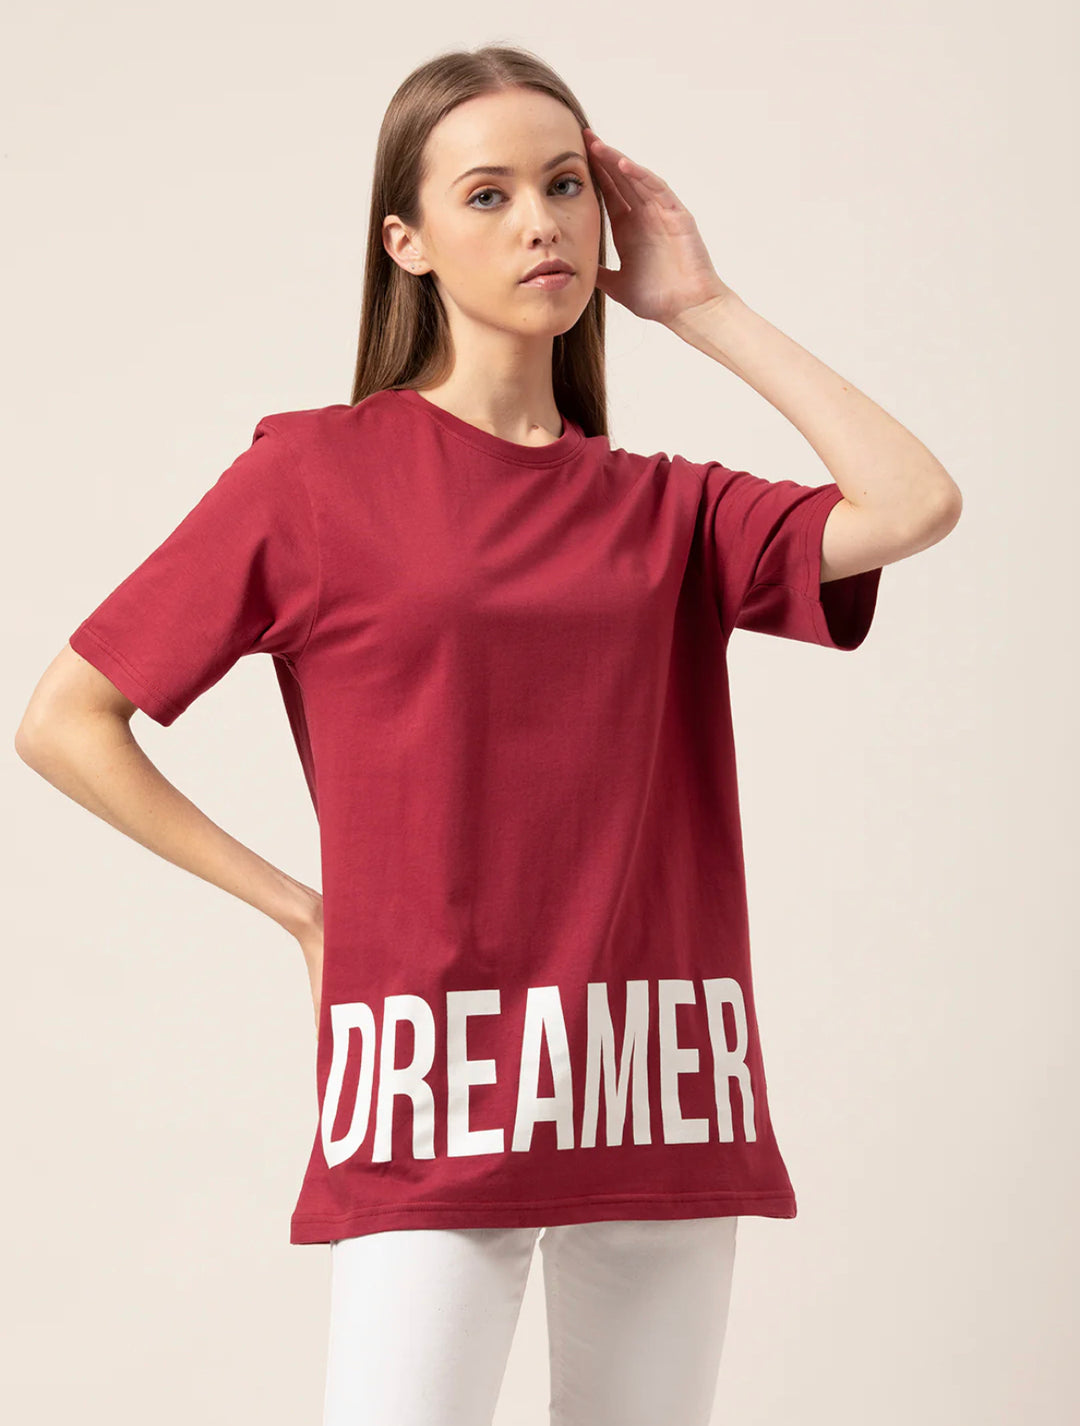 What to Look for in a Oversized T-Shirts For Women?